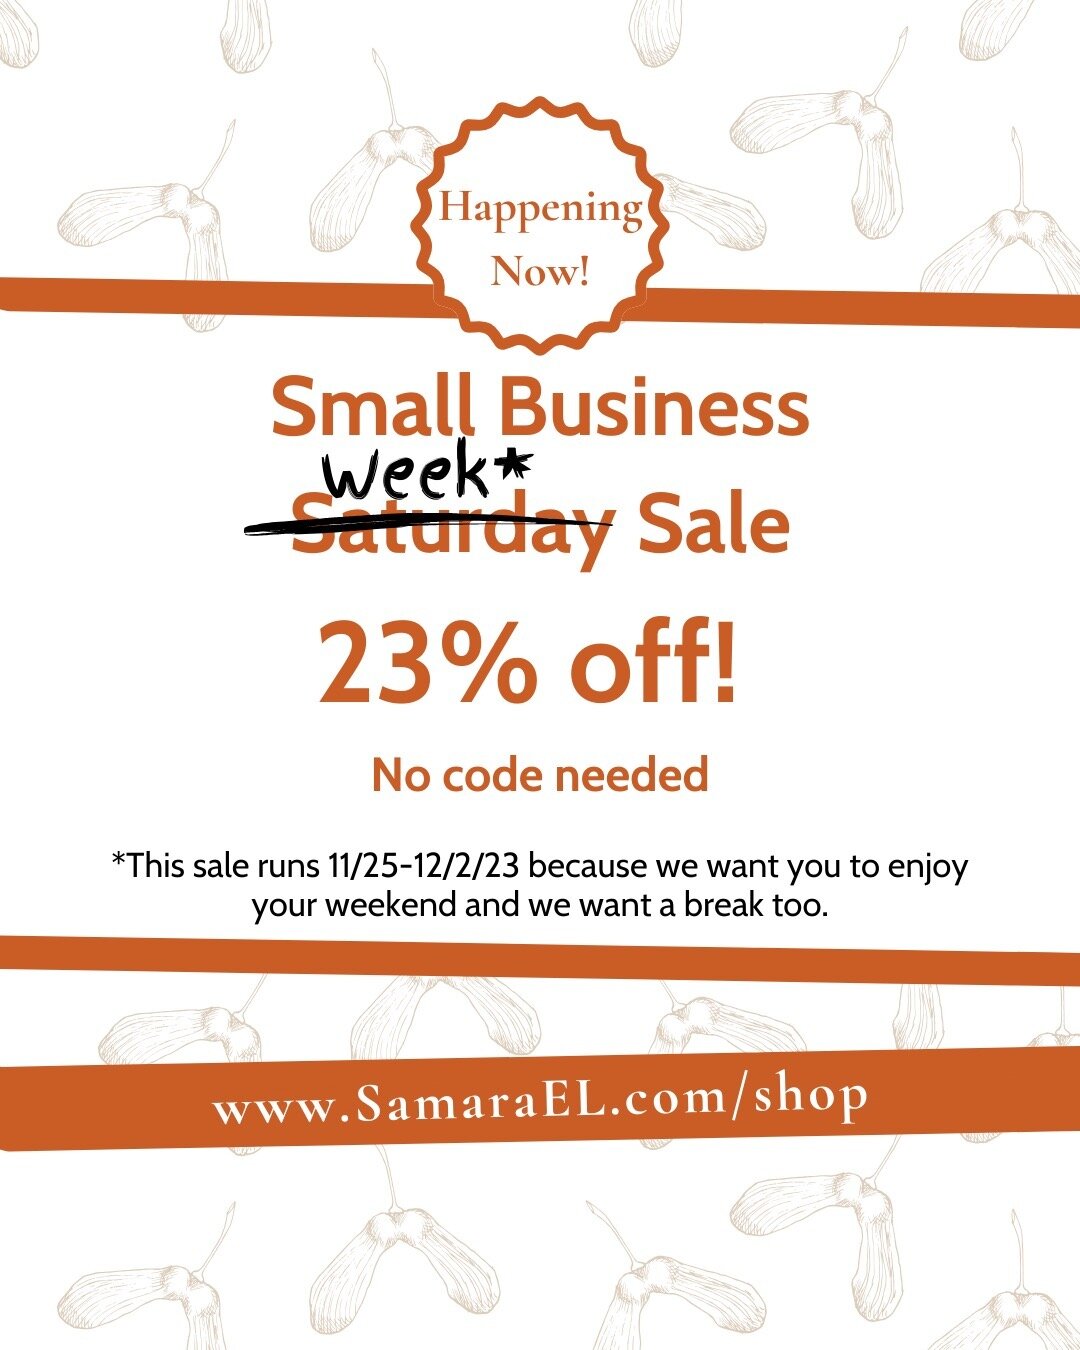 We wanted to celebrate Small Business Saturday and all you do for young children, but wanted you to enjoy your weekend. So&hellip;

We made it a Small Business WEEK Sale by offering you a 23% discount off everything in the Samara Shop now through Dec